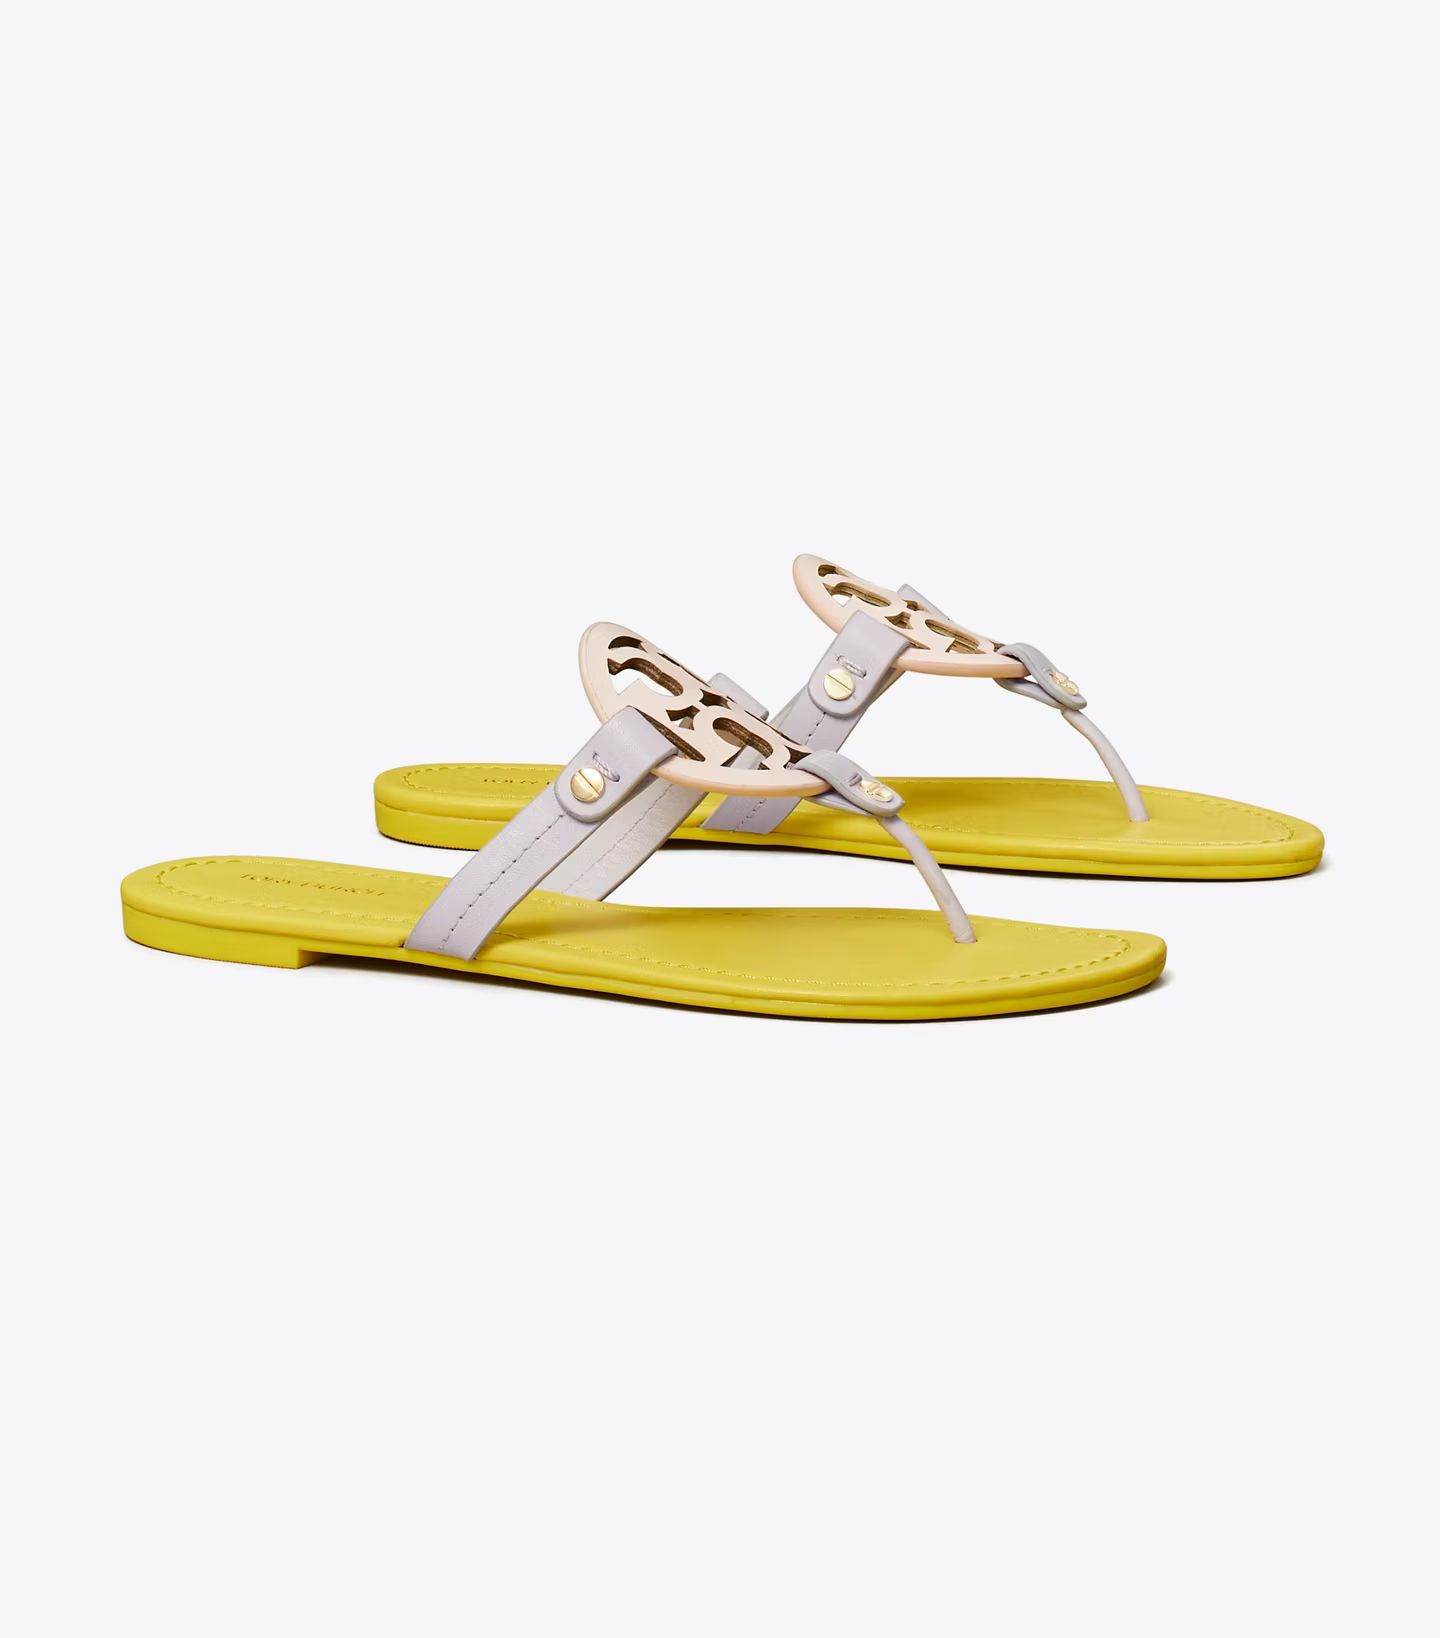 MILLER SANDAL, LEATHER | Tory Burch (US)